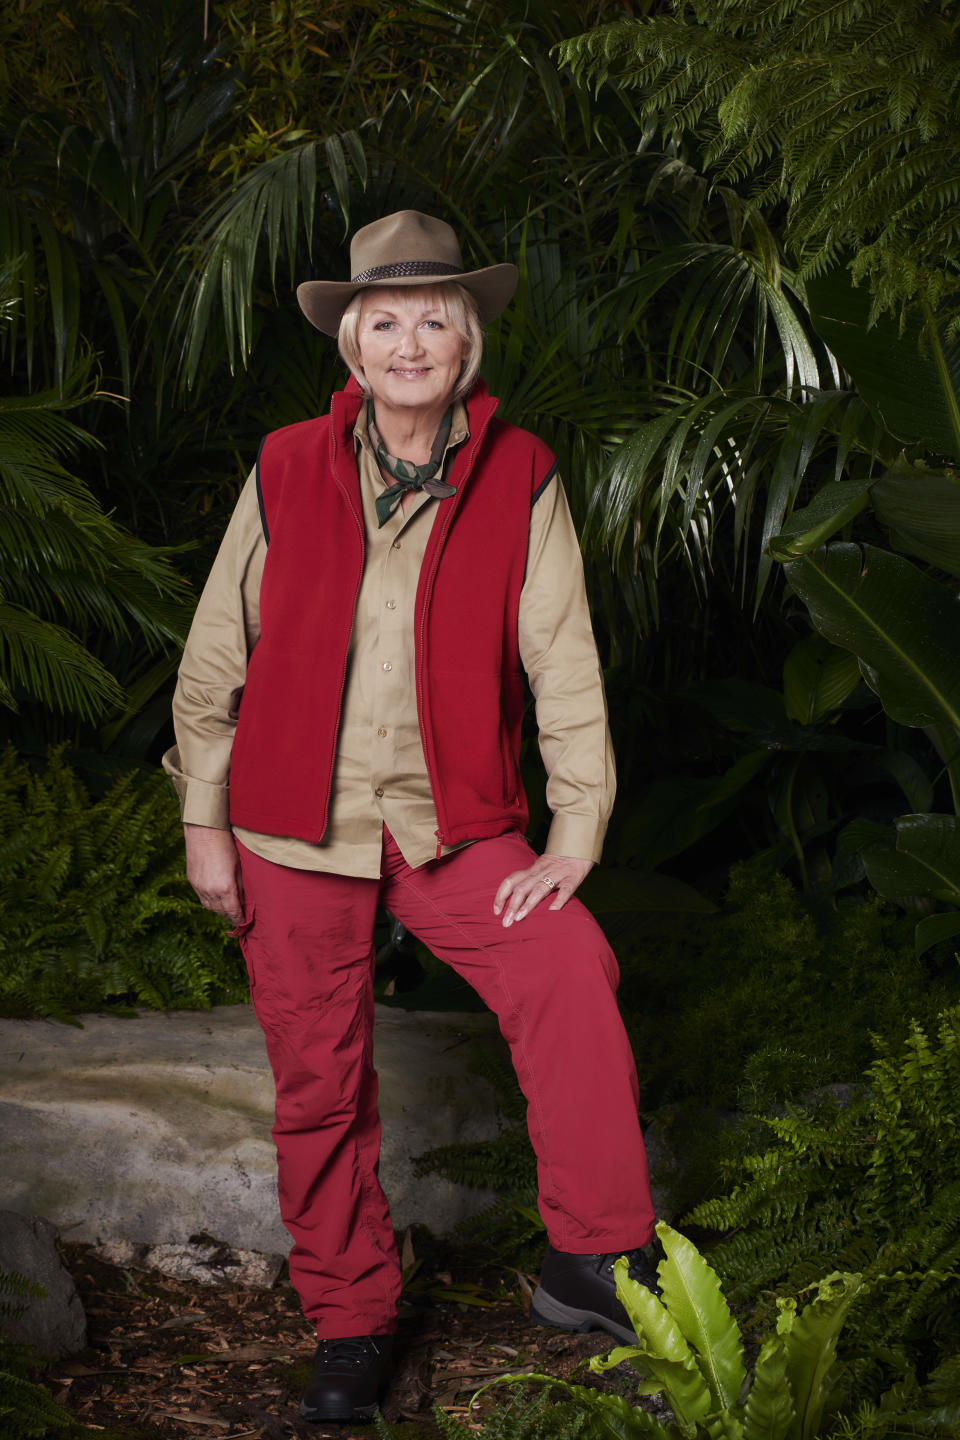 Sue Cleaver - I'm a Celebrity... Get Me Out of Here 2022 (ITV/Lifted Entertainment)